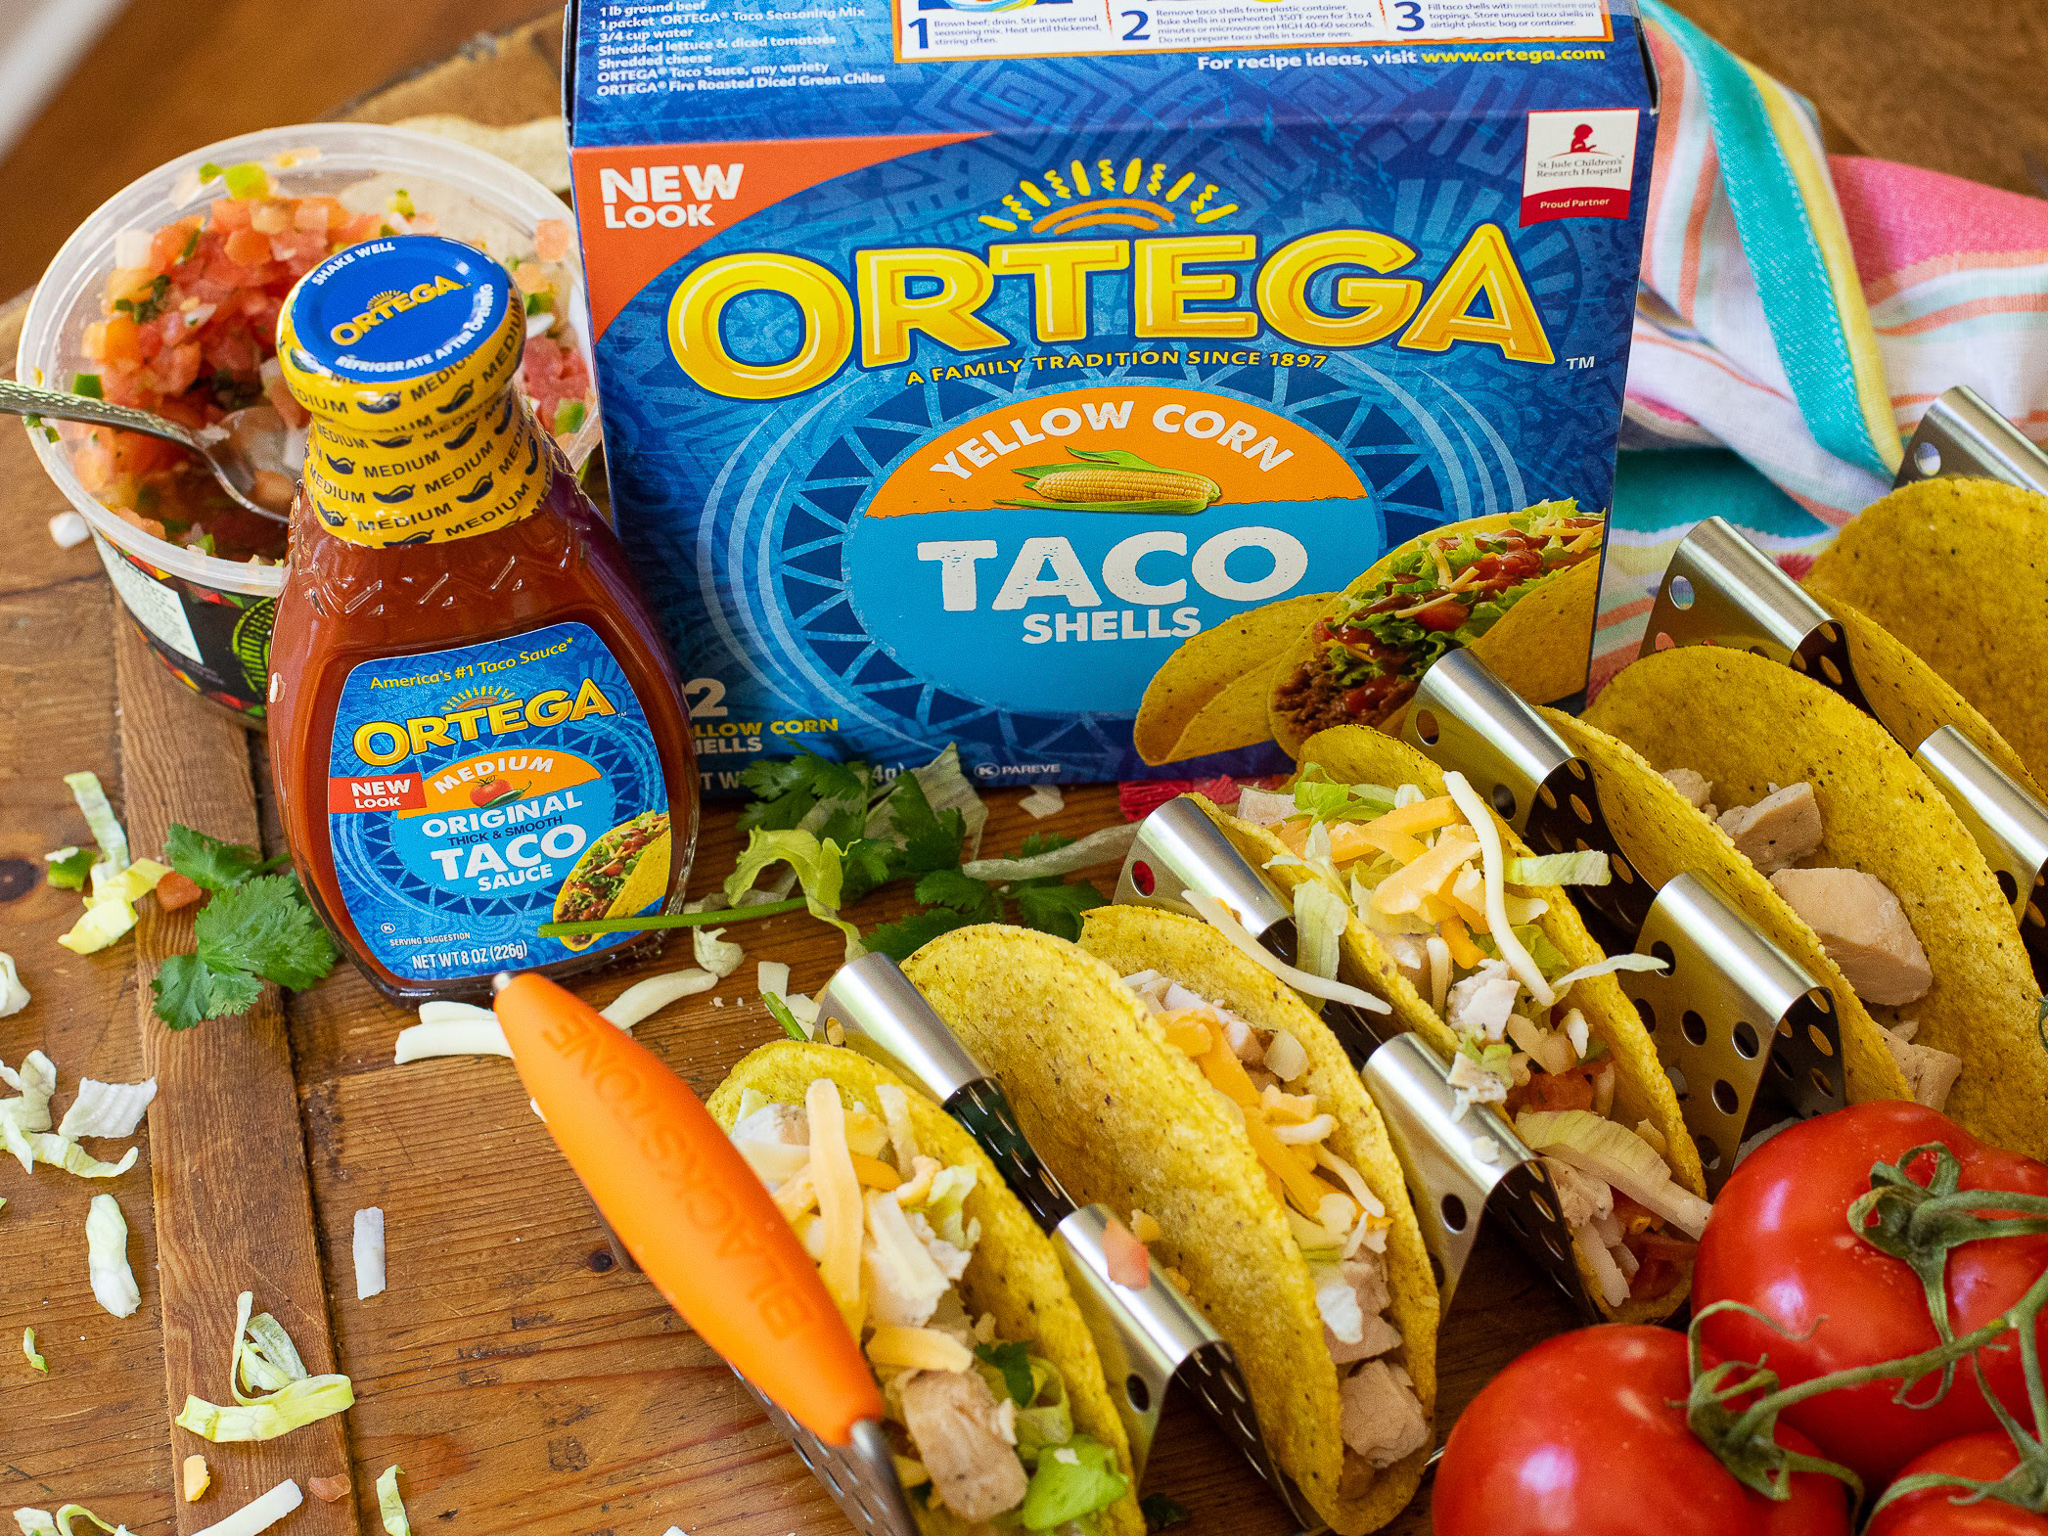 Ortega Products Are As Low As $1.49 At Kroger